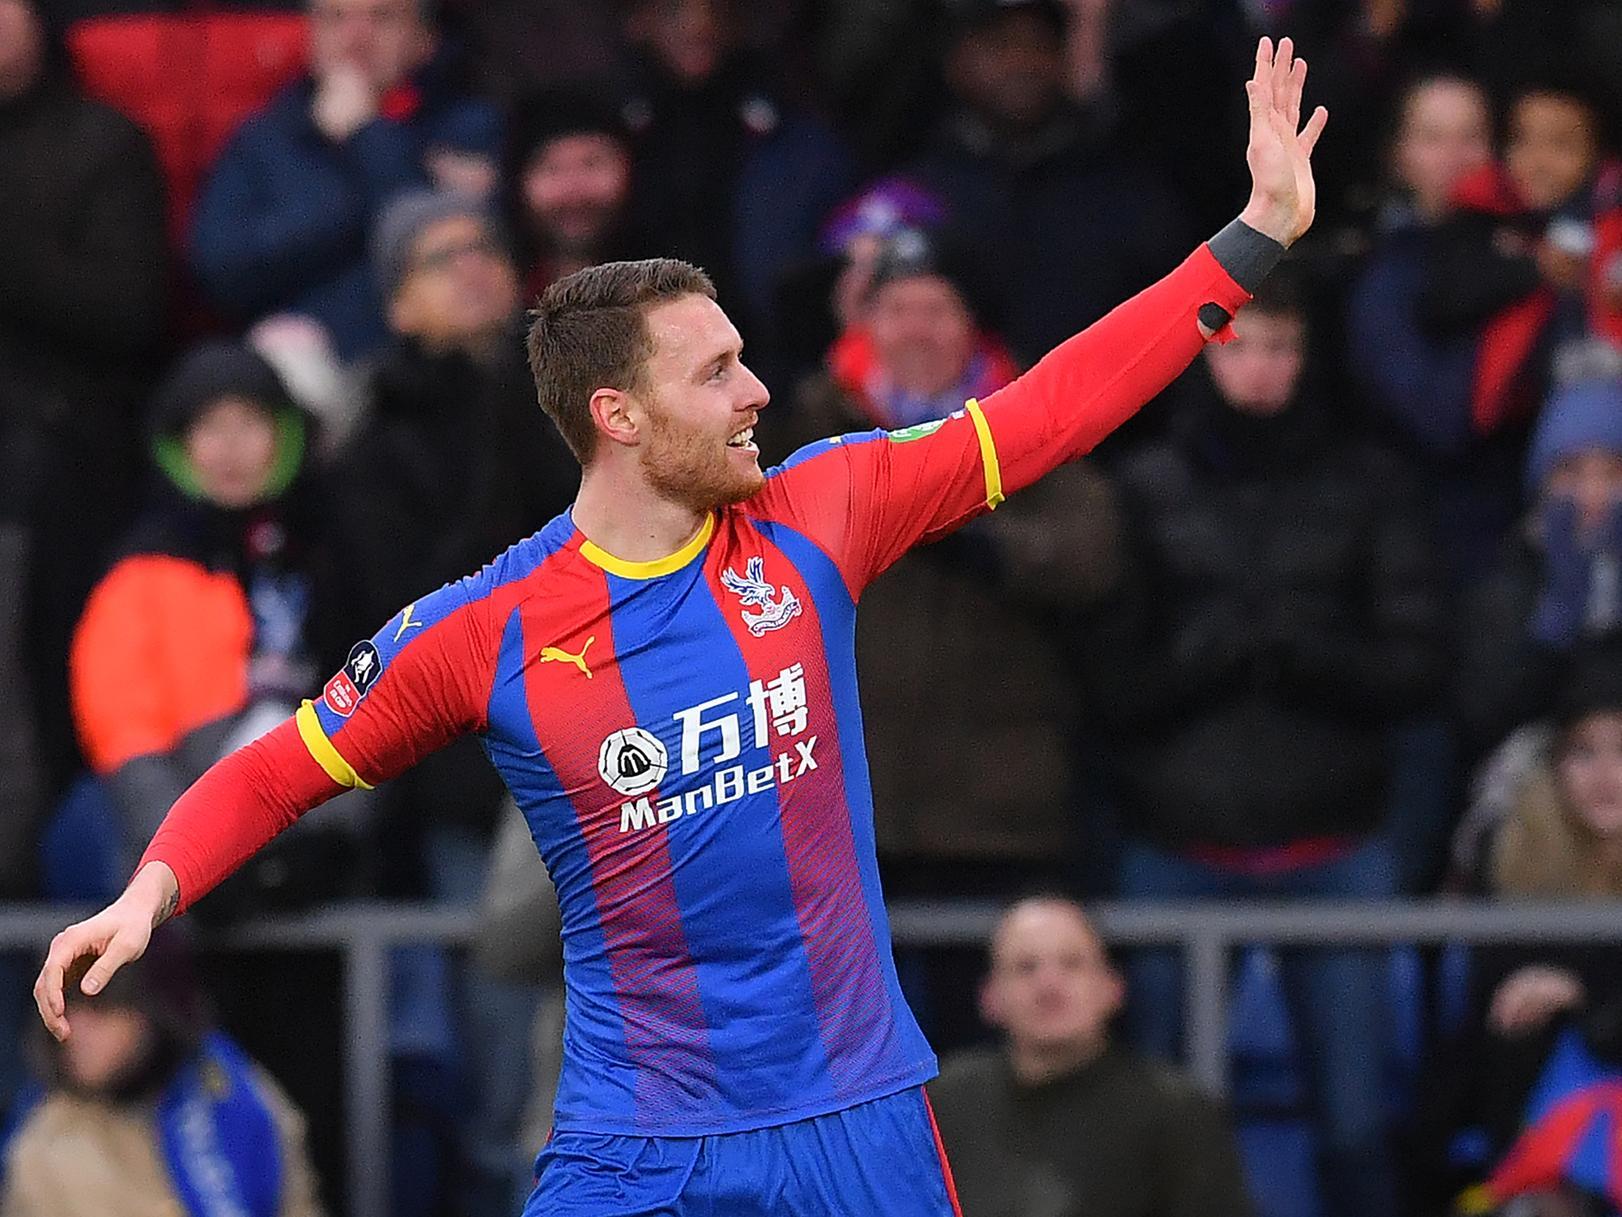 Sheffield Wednesday are said to be in pole position to secure a move for Crystal Palace forward Connor Wickham, after reports emerged suggesting Cardiff City were unlikely to seal the deal. (Wales Online)